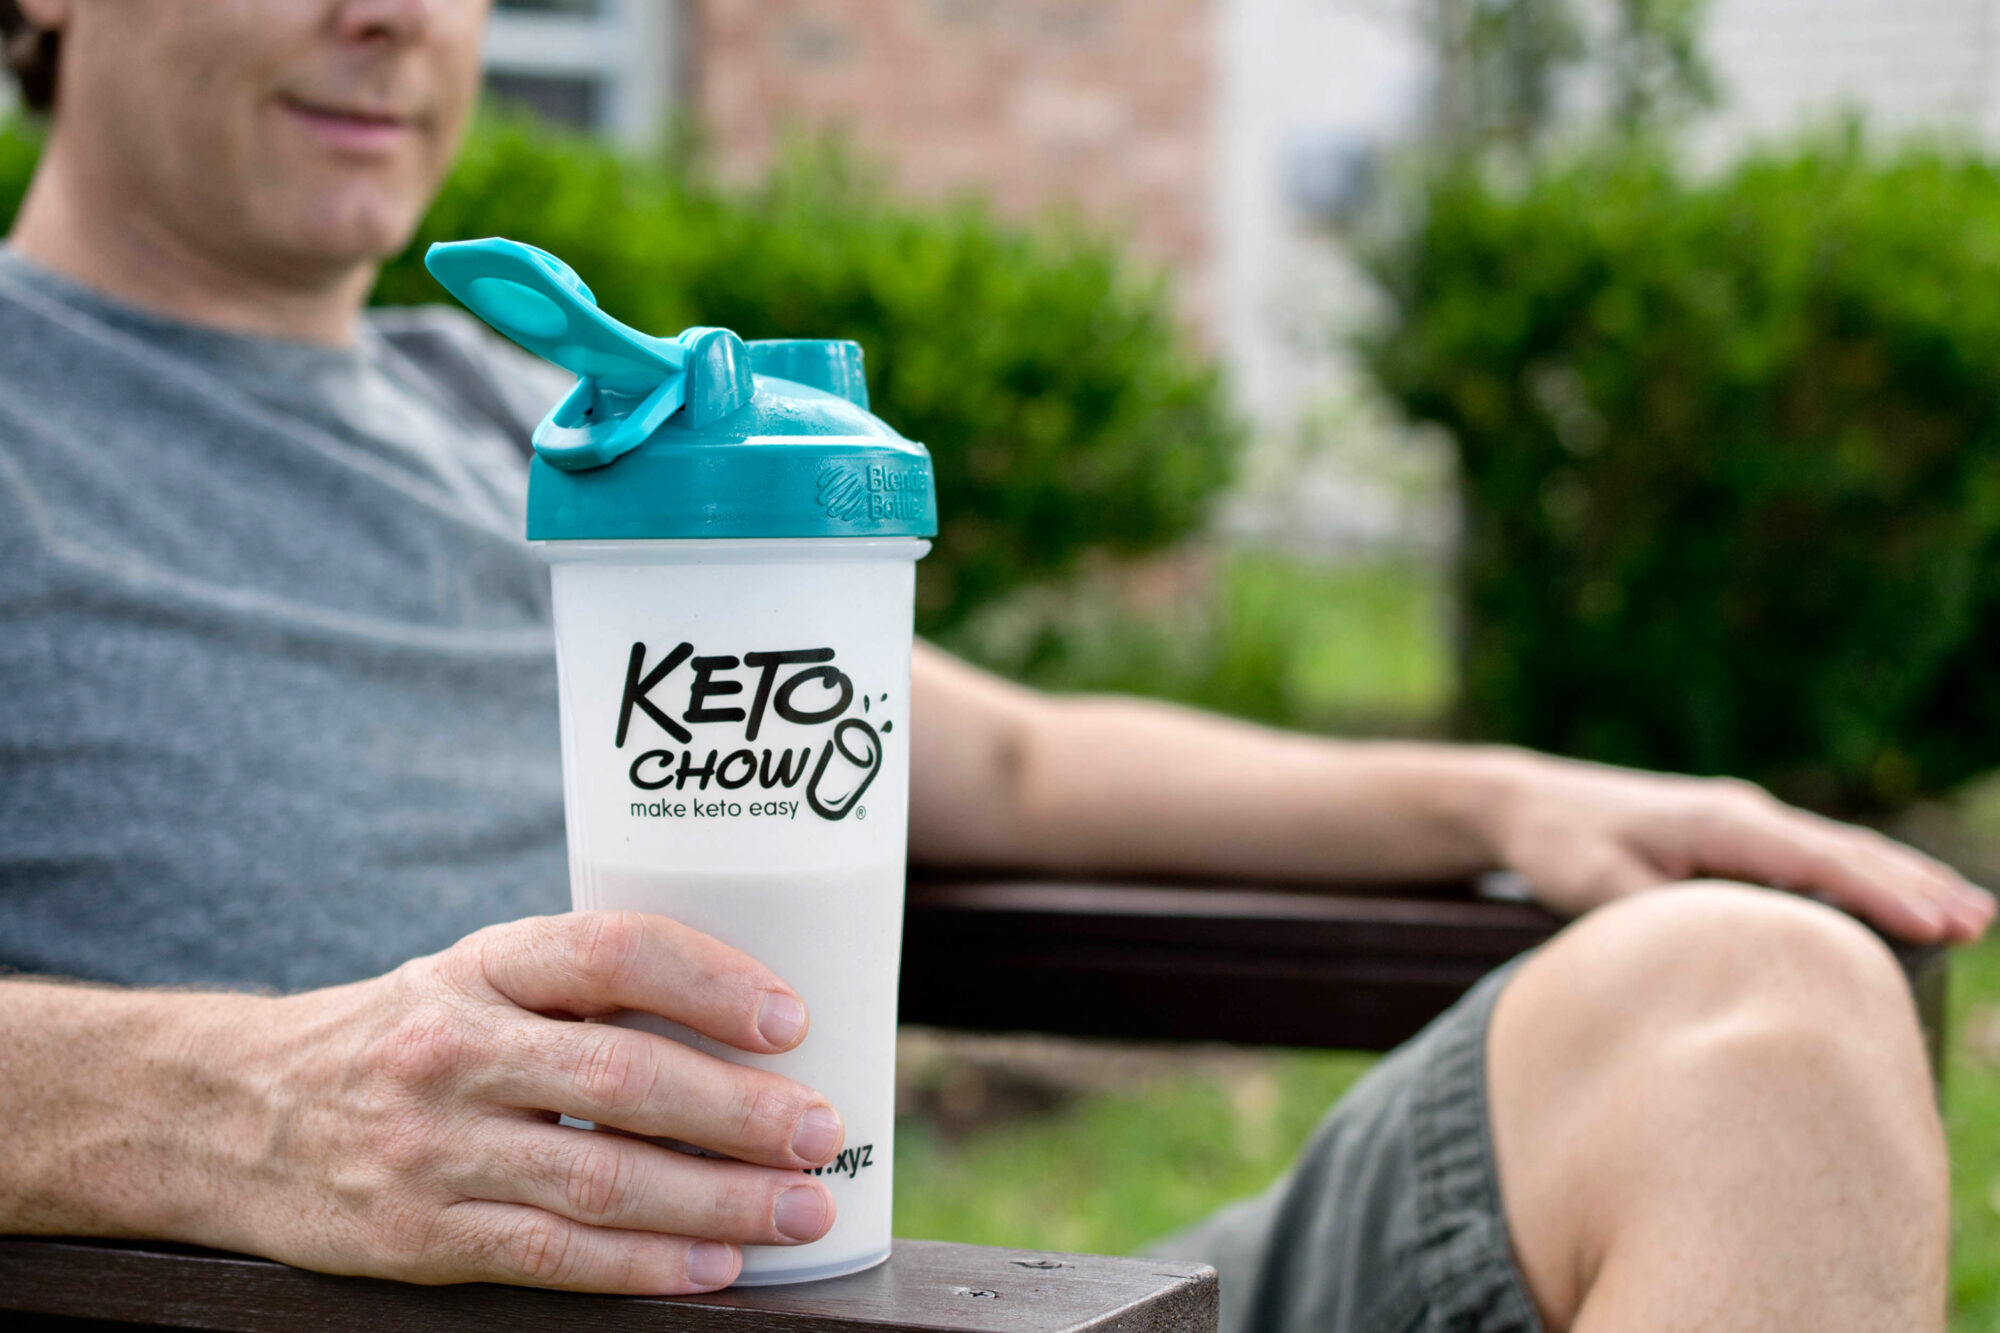 light colored keto chow in a teal blender bottle (most likely cookies and cream, banana, or vanilla) held by a man in a grey shirt.